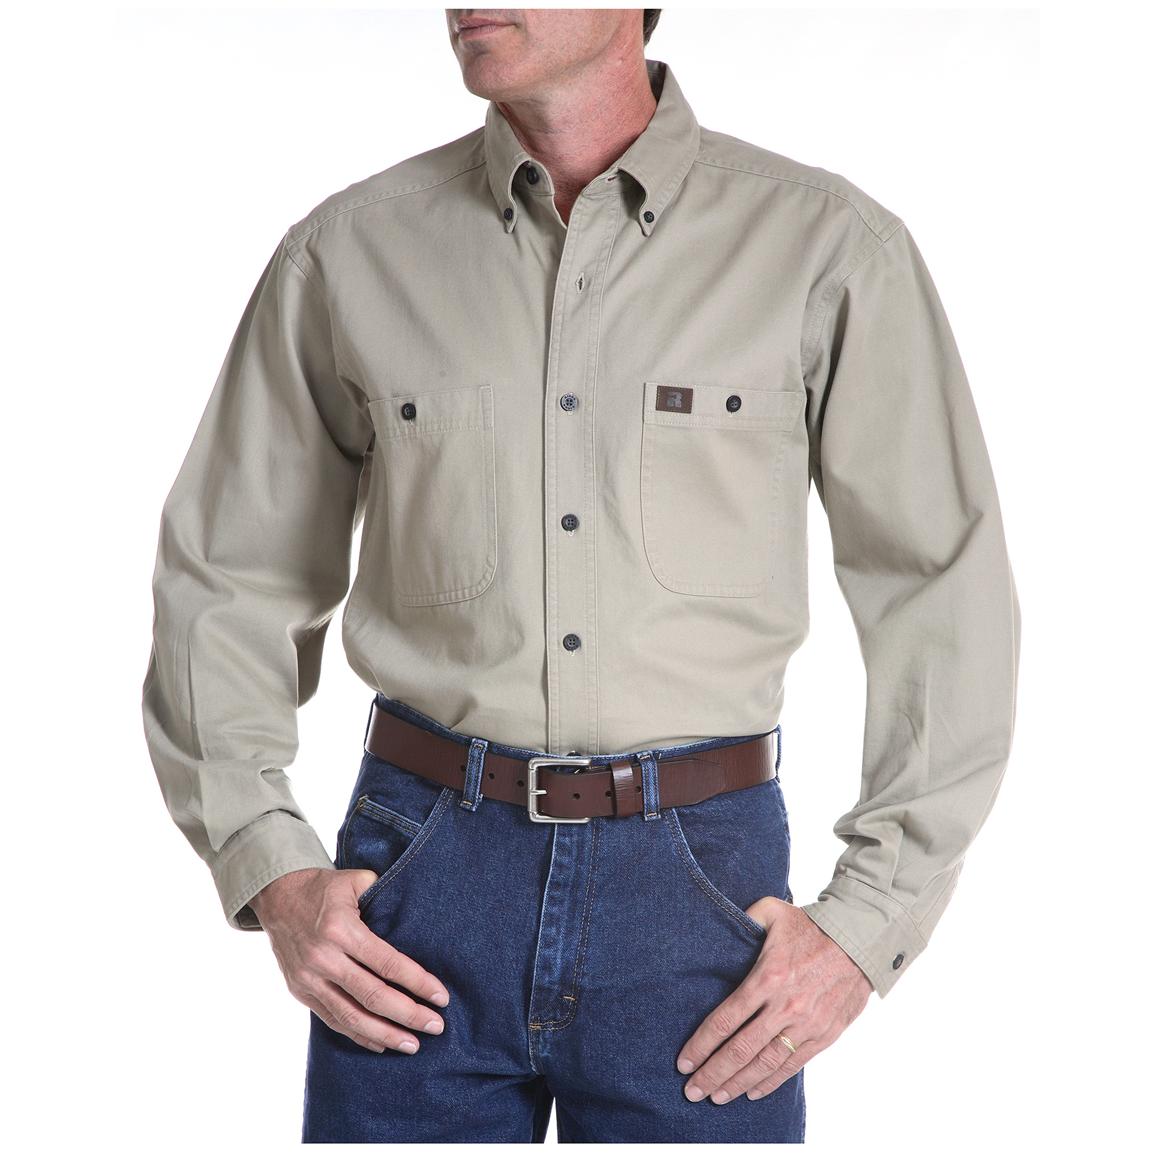 Men's Riggs® Twill Work Shirt - 220022, Shirts at Sportsman's Guide